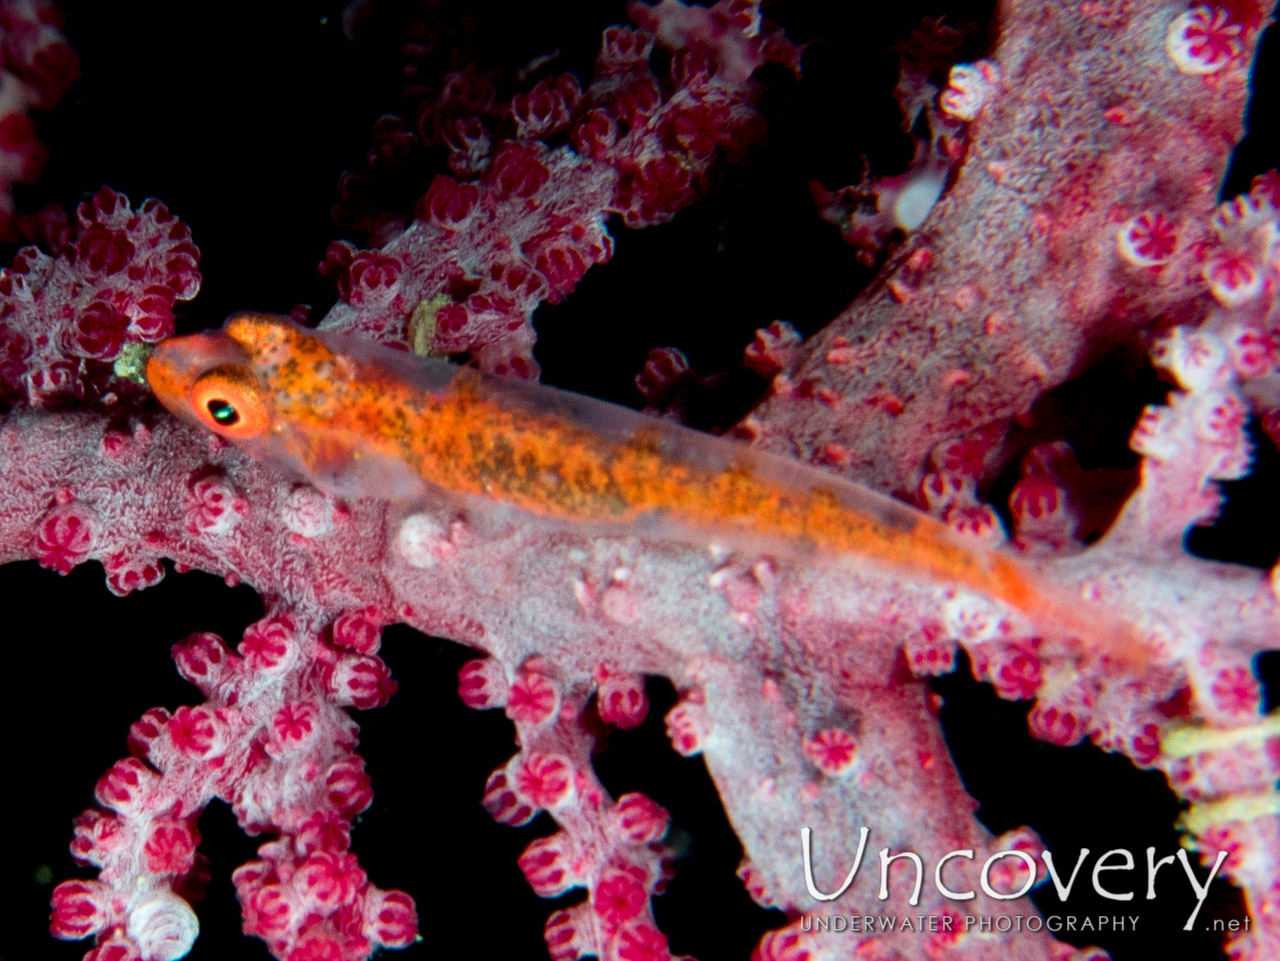 Goby, photo taken in Indonesia, North Sulawesi, Lembeh Strait, Nudi Retreat